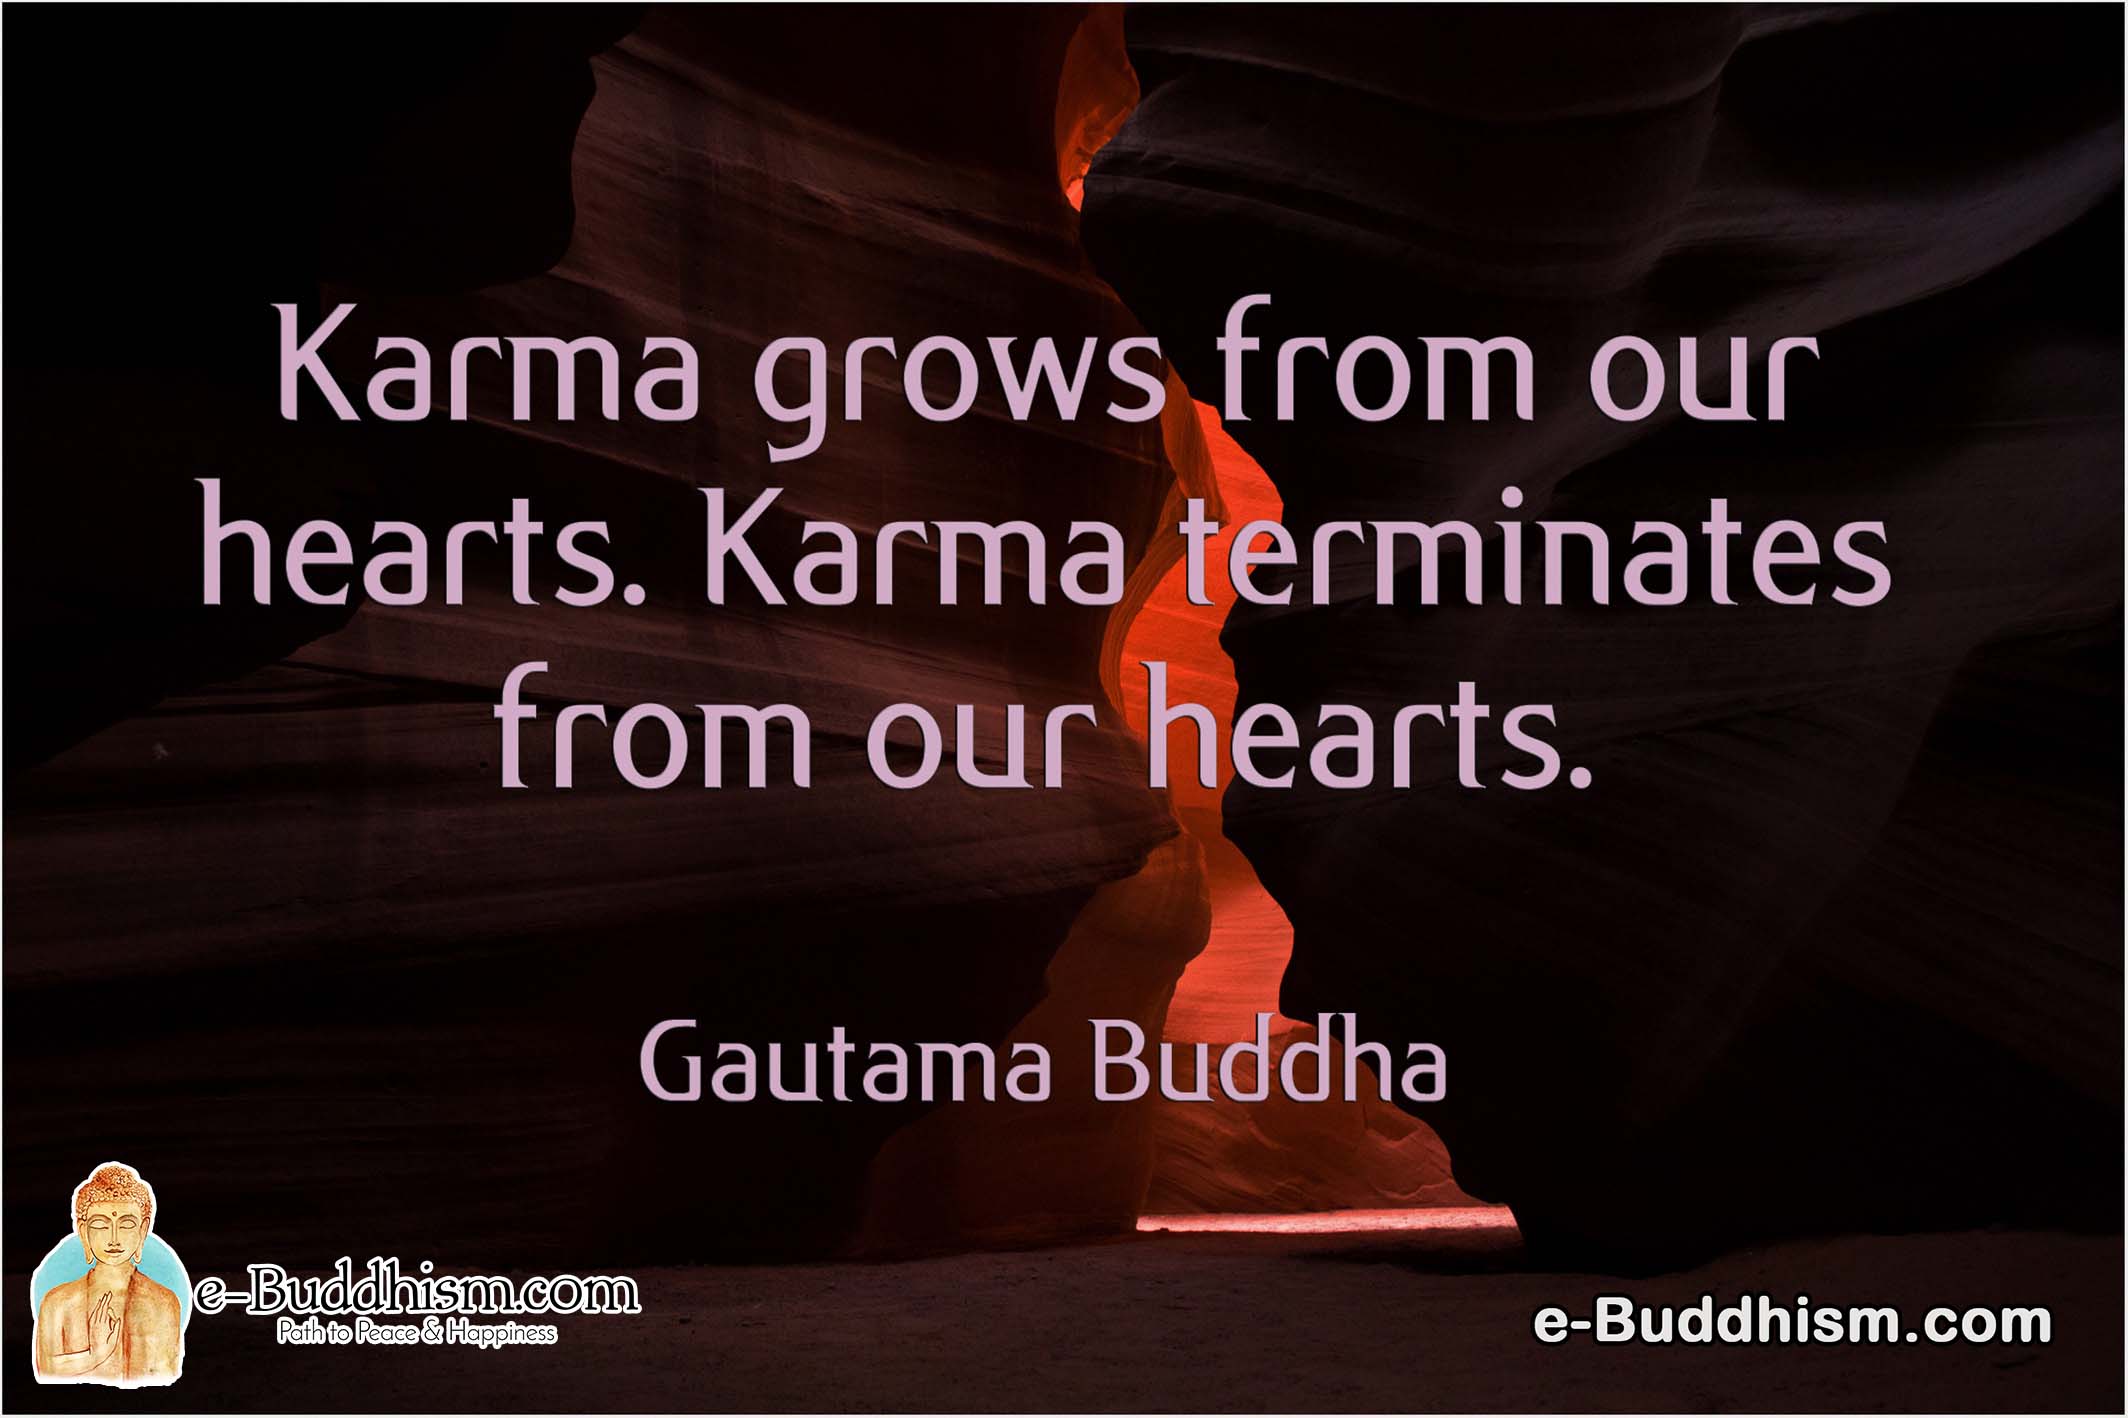 Karma grows from our hearts. Karma terminates from our hearts. -Buddha